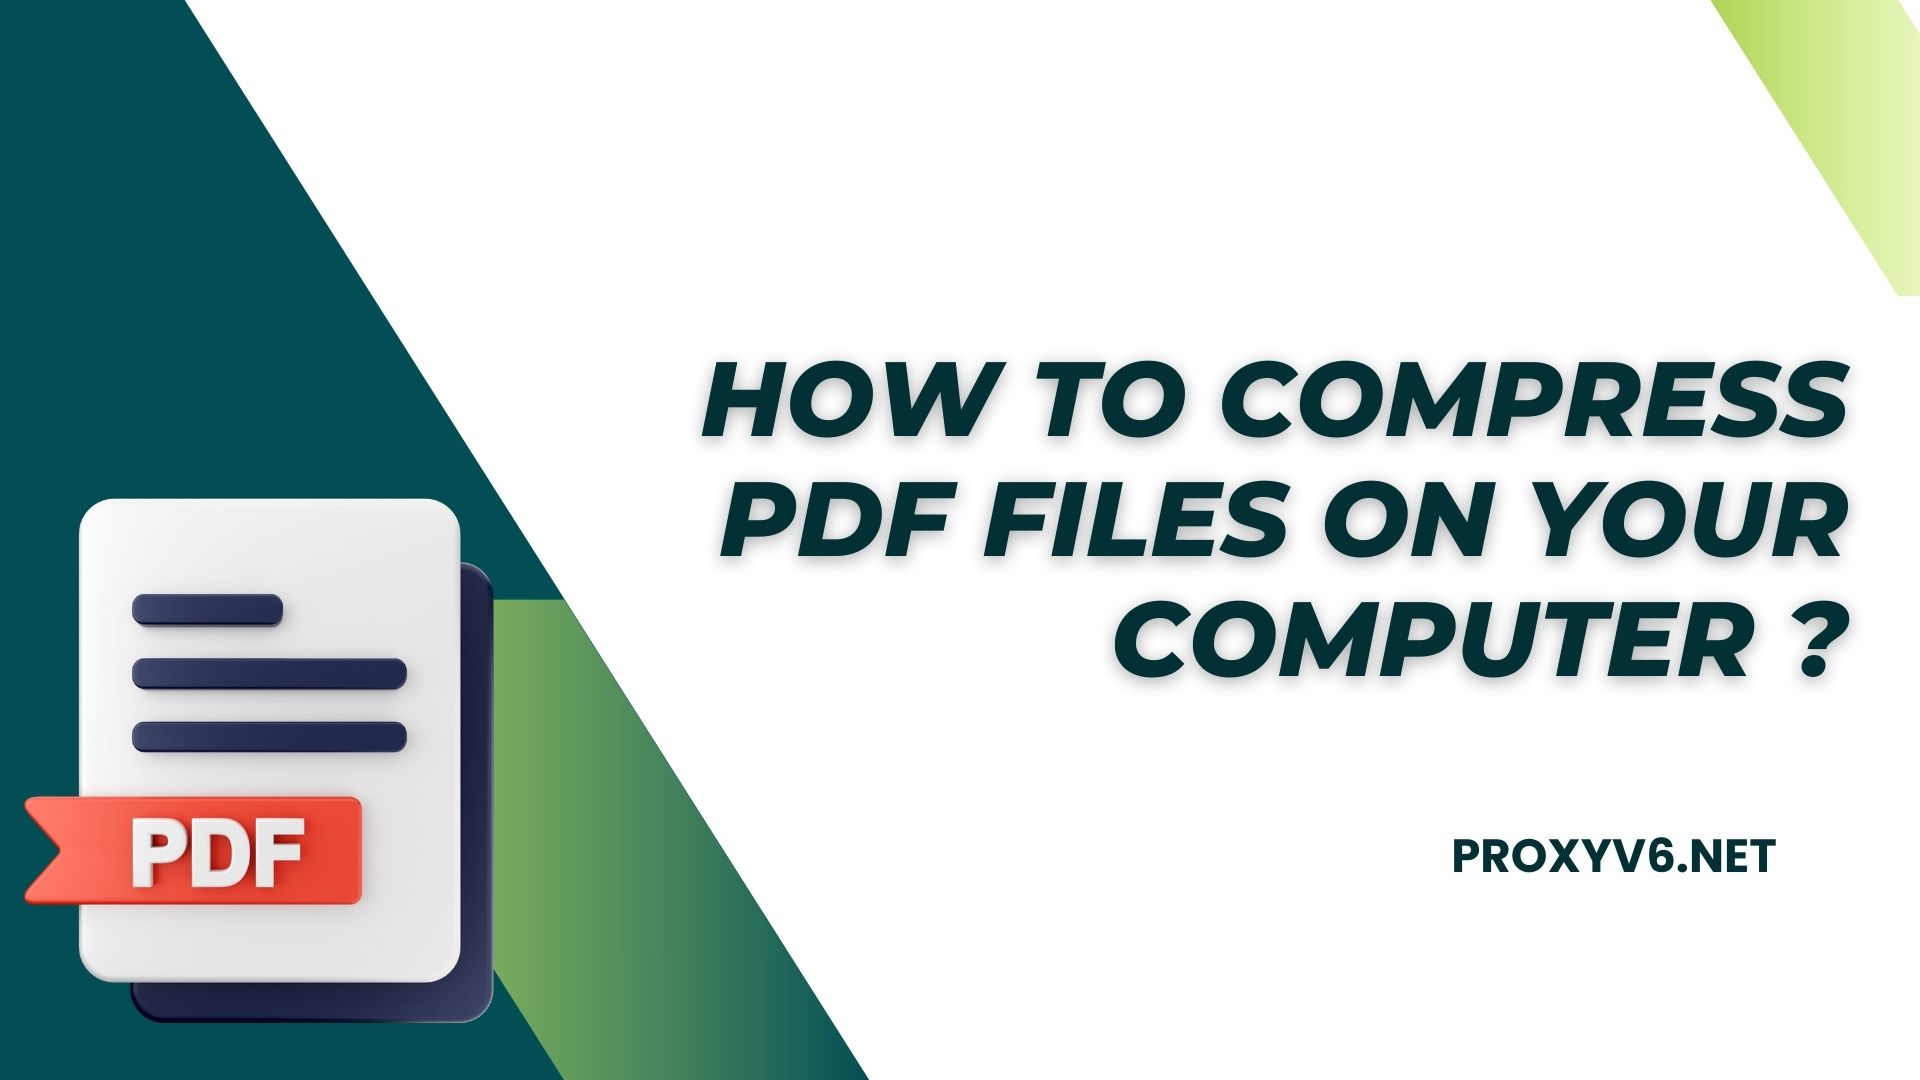 How to compress PDF files on your computer?